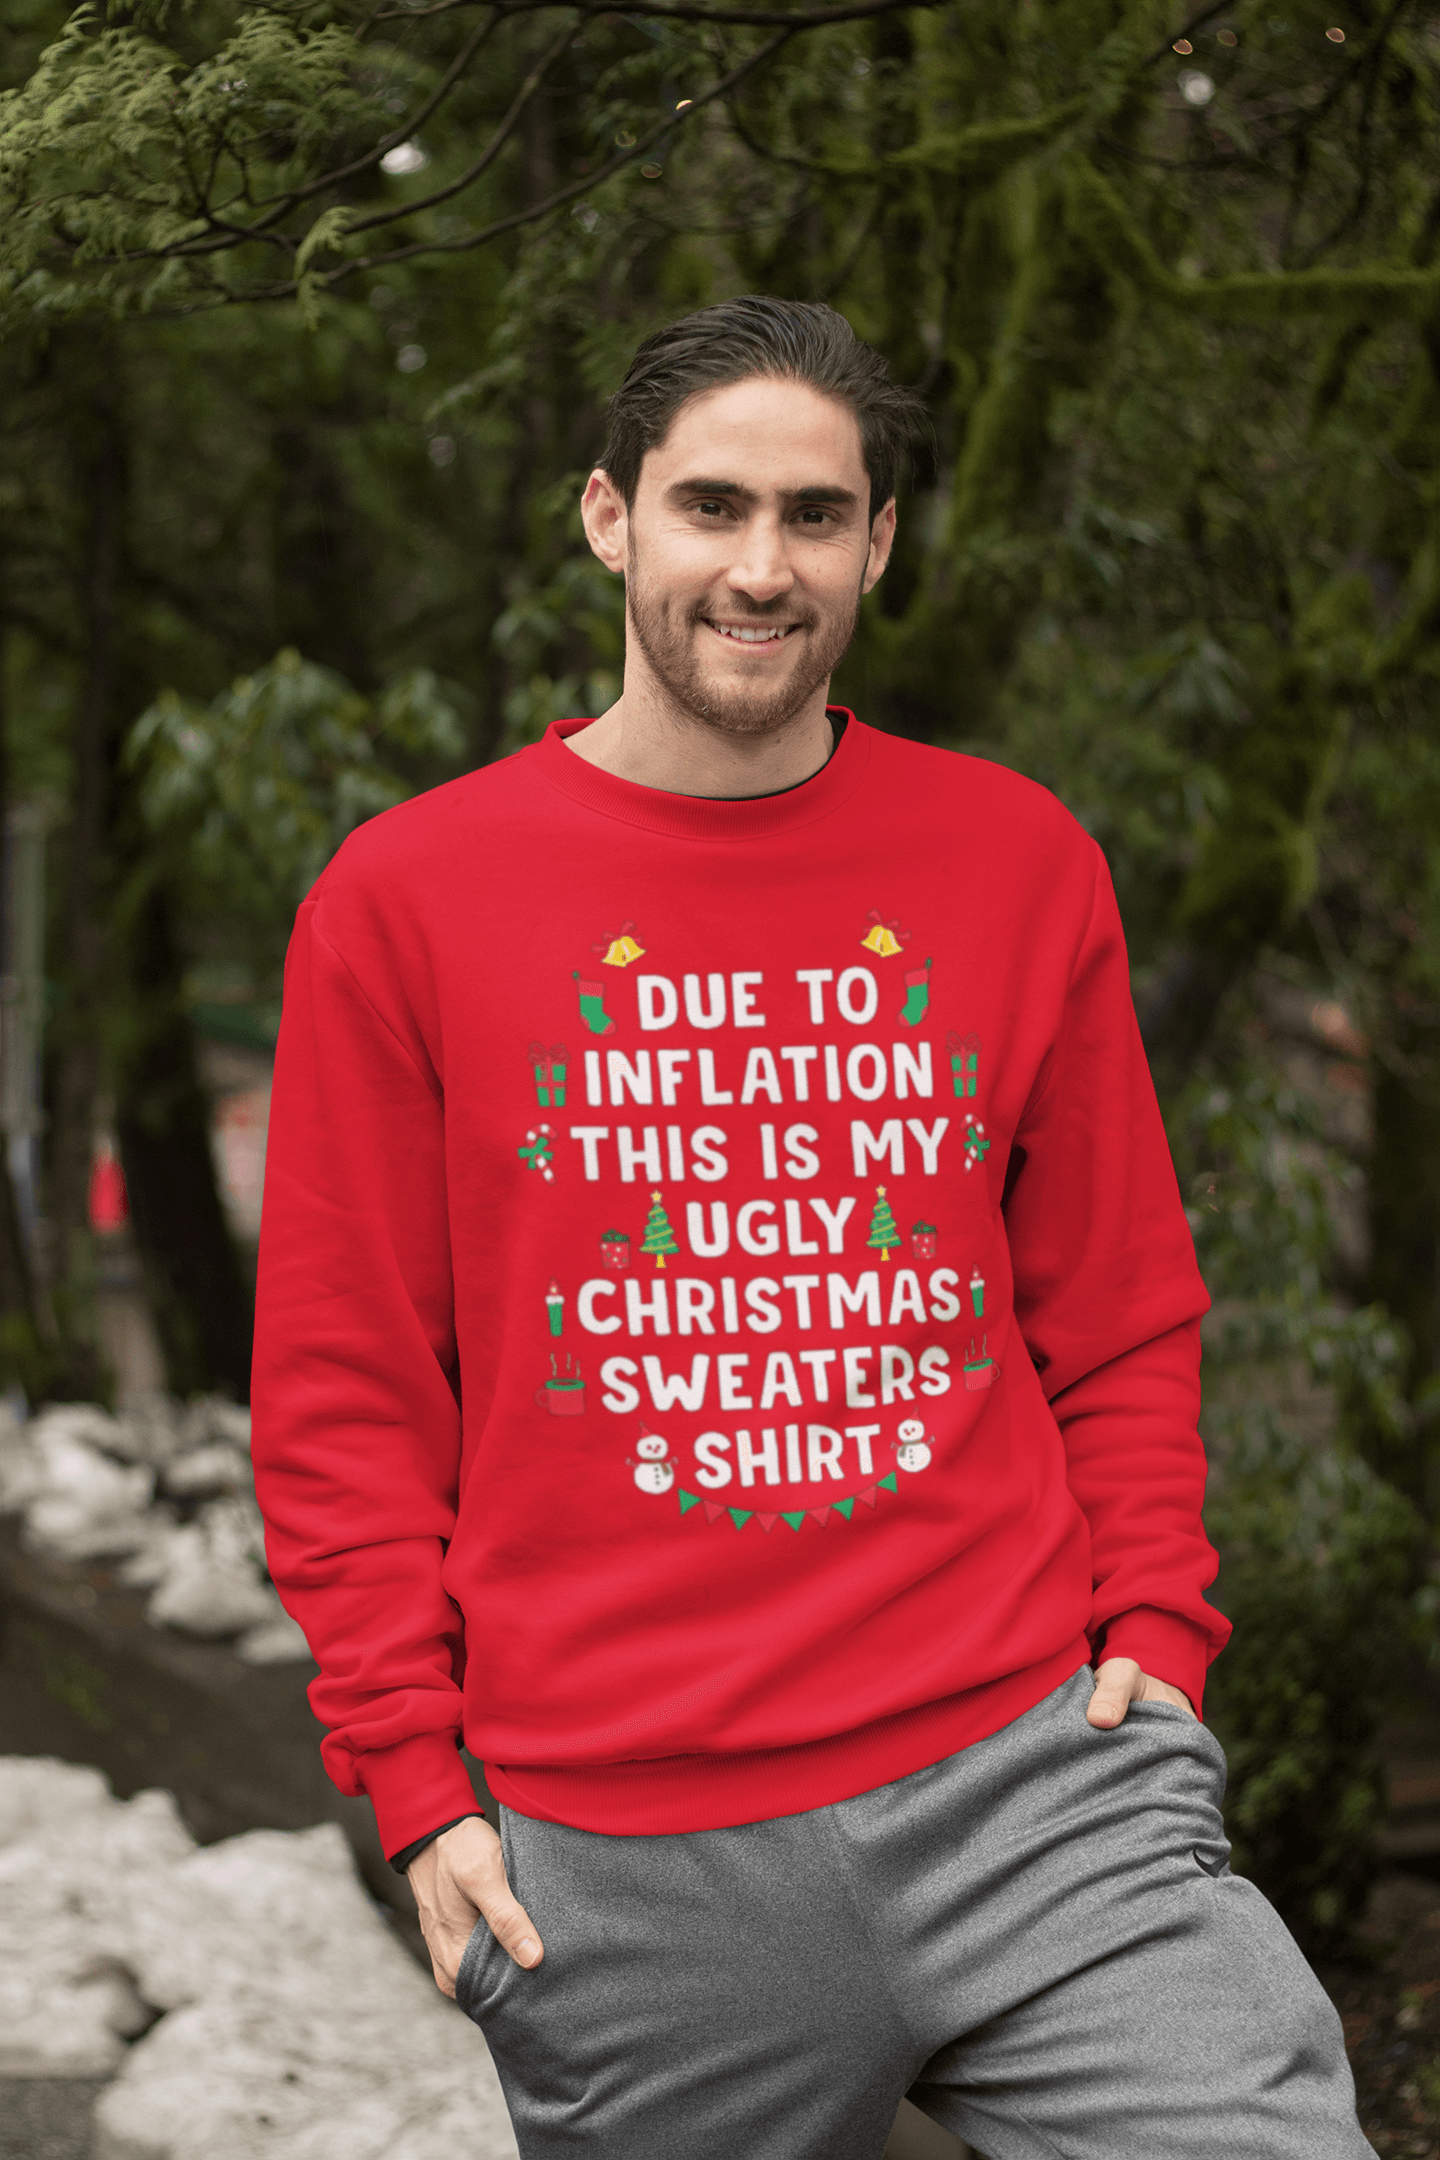 Due To Inflation This is My Ugky Christmas Sweater Top Koala Tee Pullover - TopKoalaTee